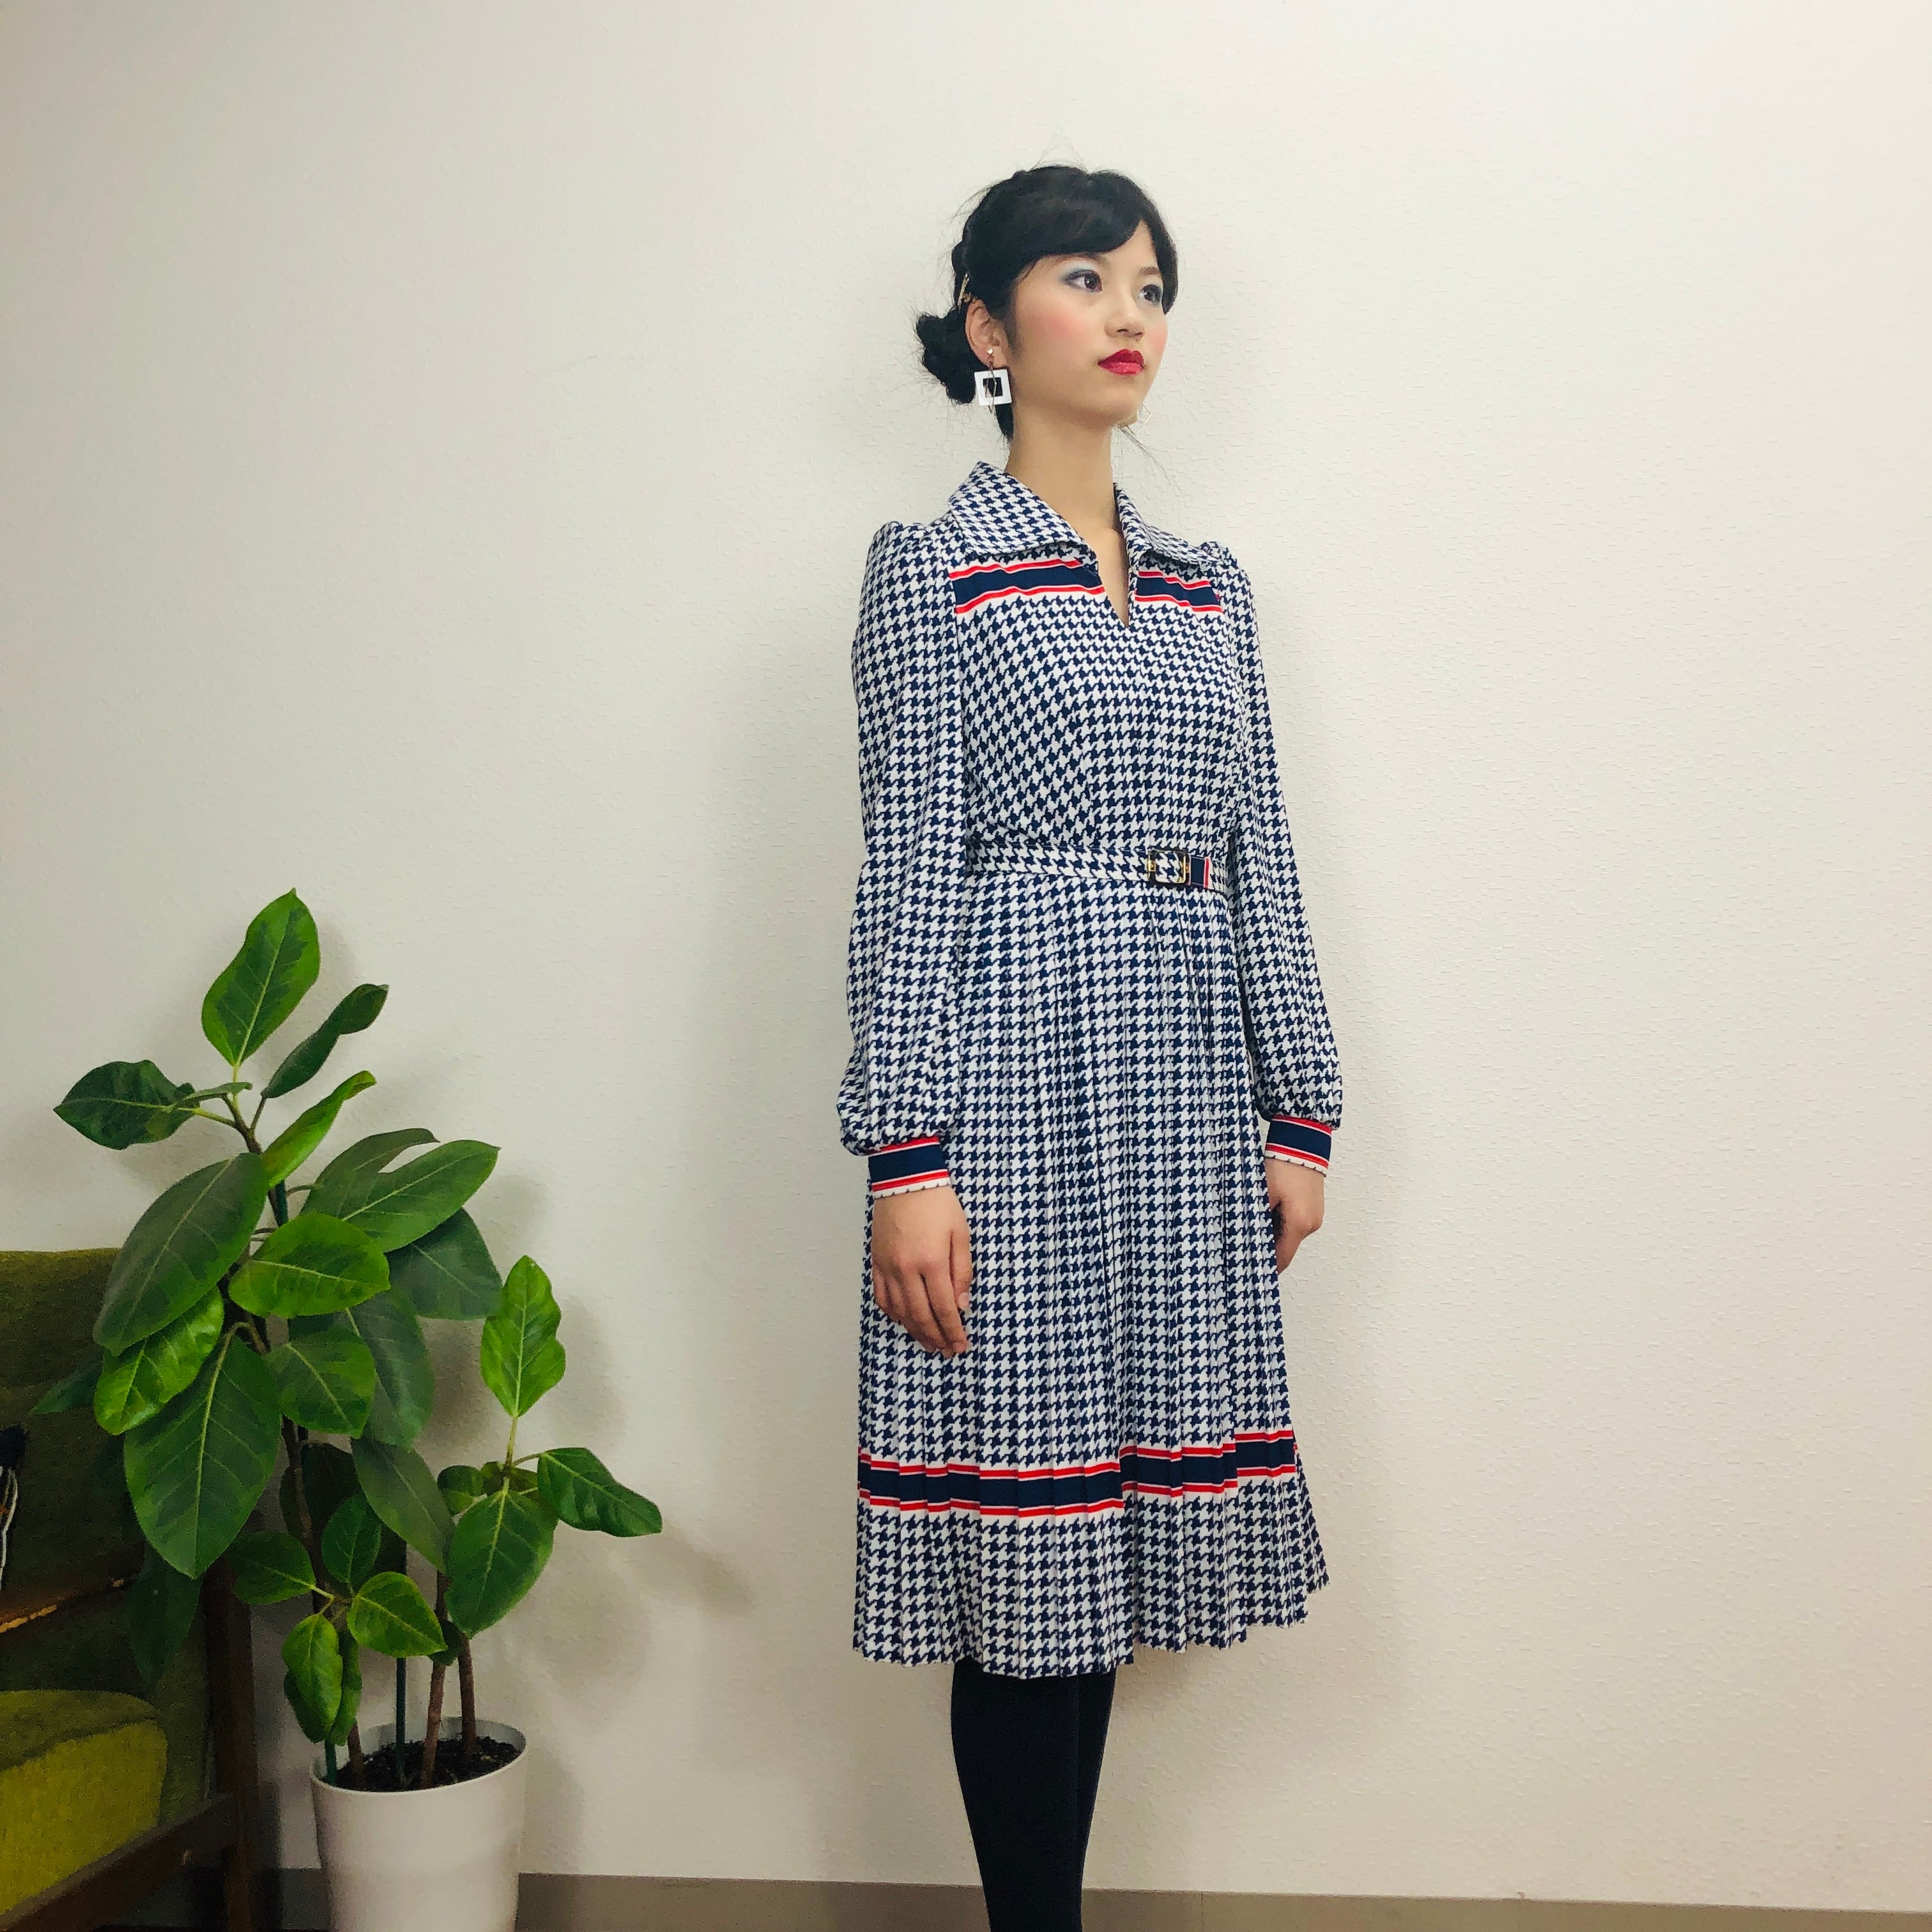 ❤️New❤️57 vintage ヴィンテージ レトロ 柄 ワンピース